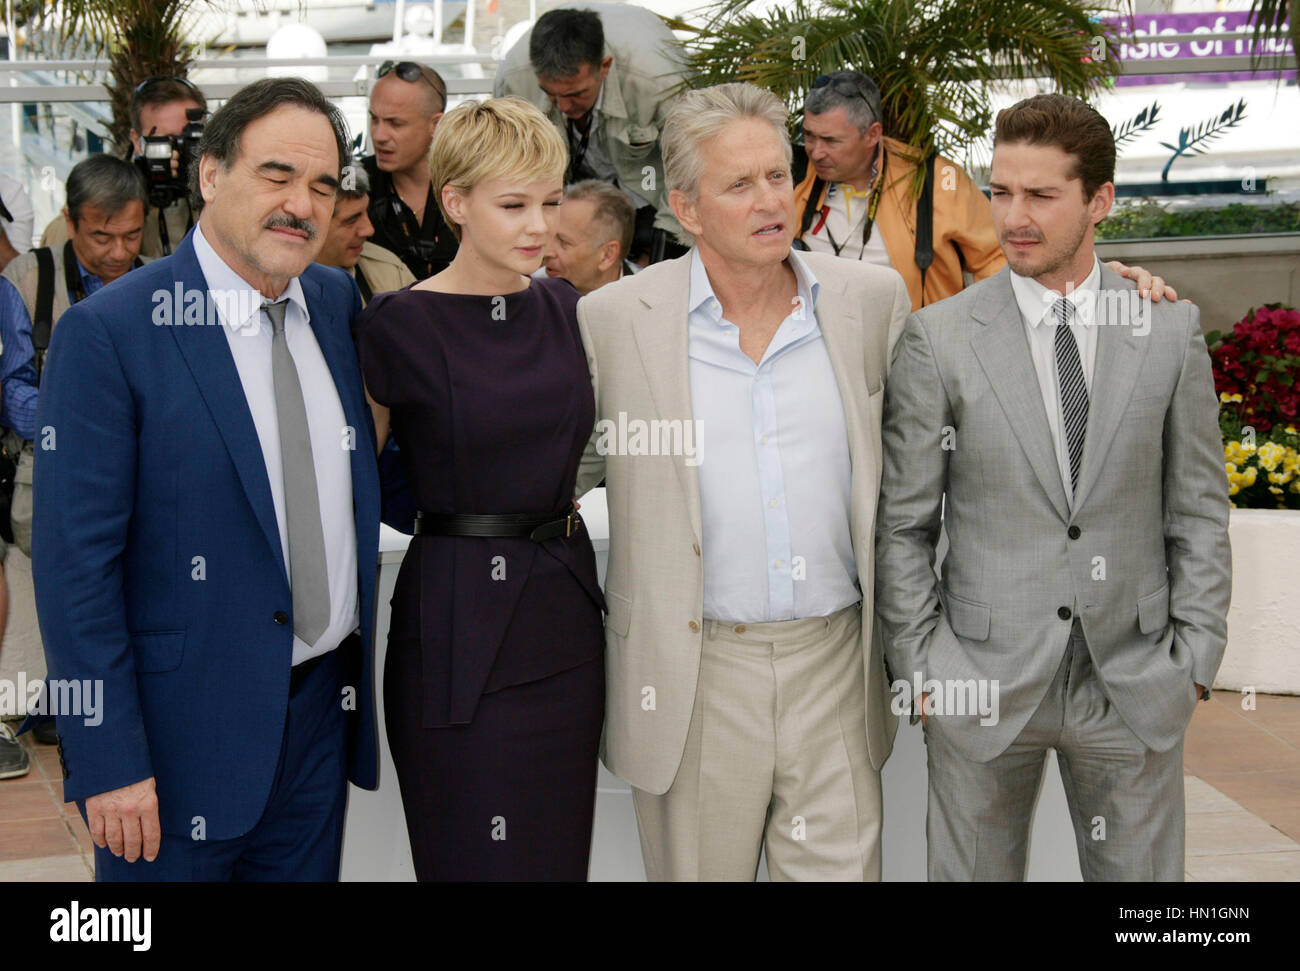 From left, Oliver Stone, Carey Mulligan, Michael Douglas, and Shia LaBeouf at the photocall for the film 'Wall Street: Money Never Sleeps', at the 63rd Cannes Film Festival in Cannes, France on May 14, 2010. Photo by Francis Specker Stock Photo